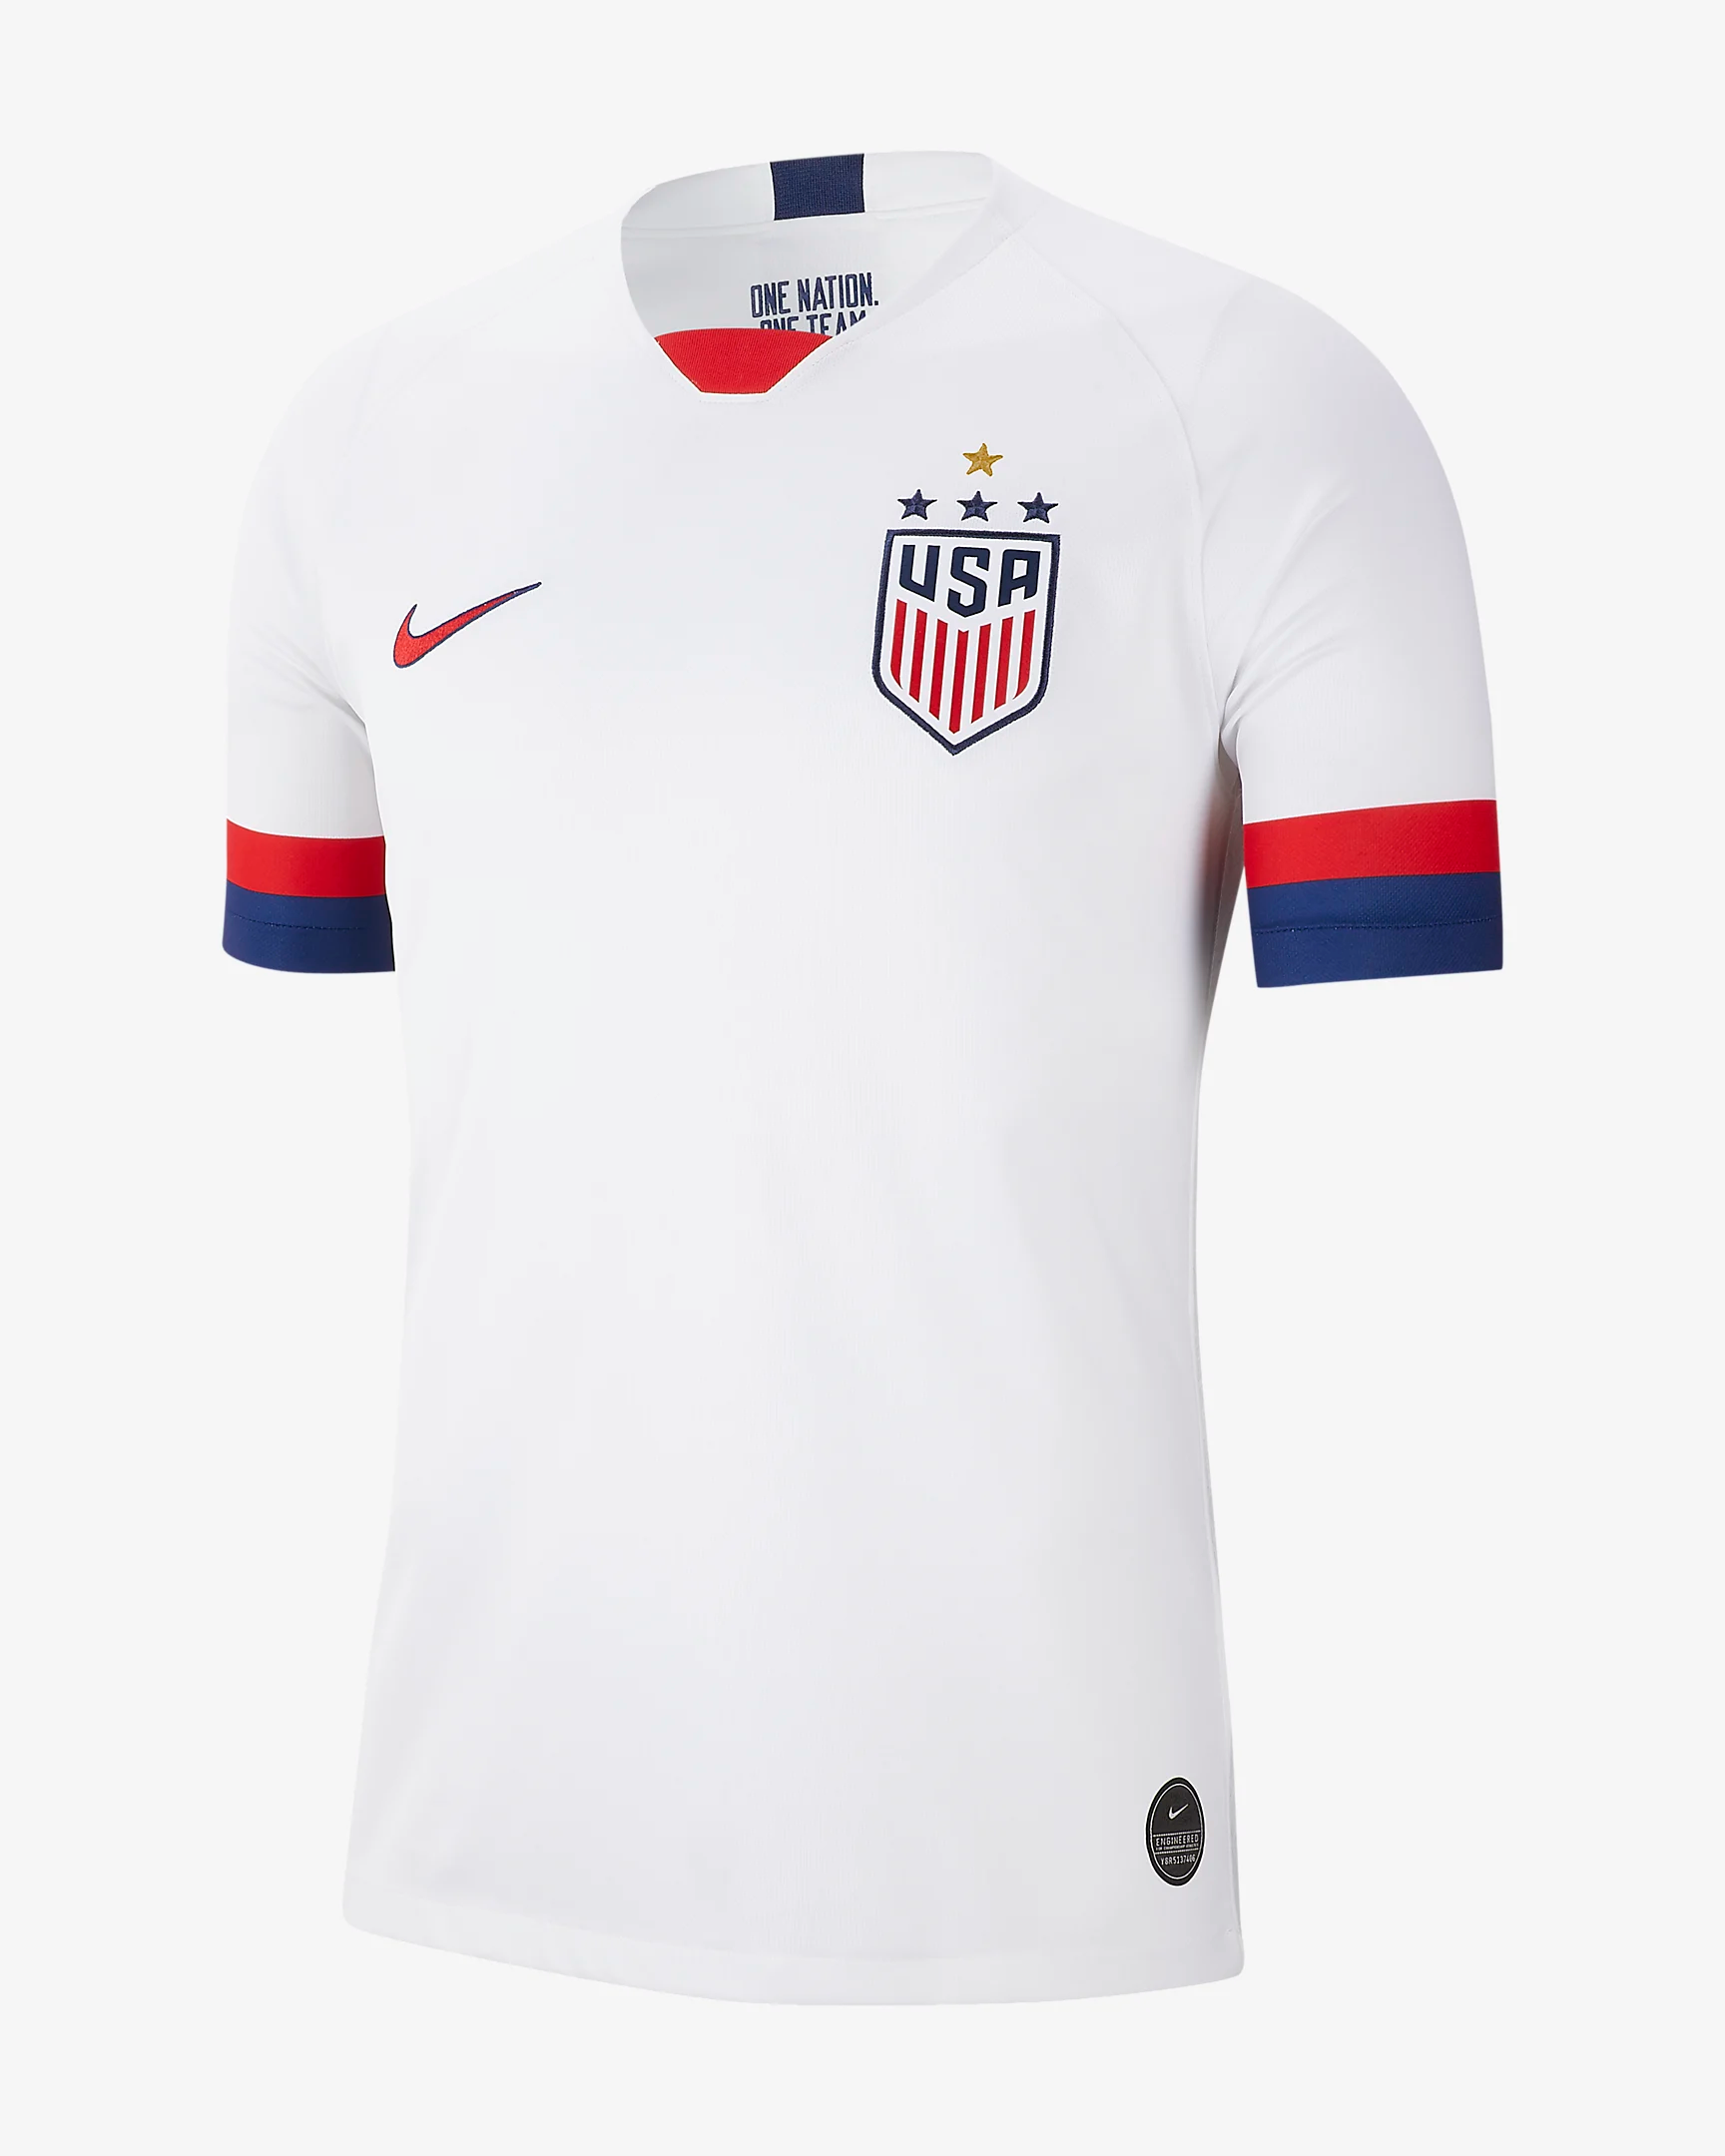 us-2019-stadium-home-mens-soccer-jersey-b6tF22.png